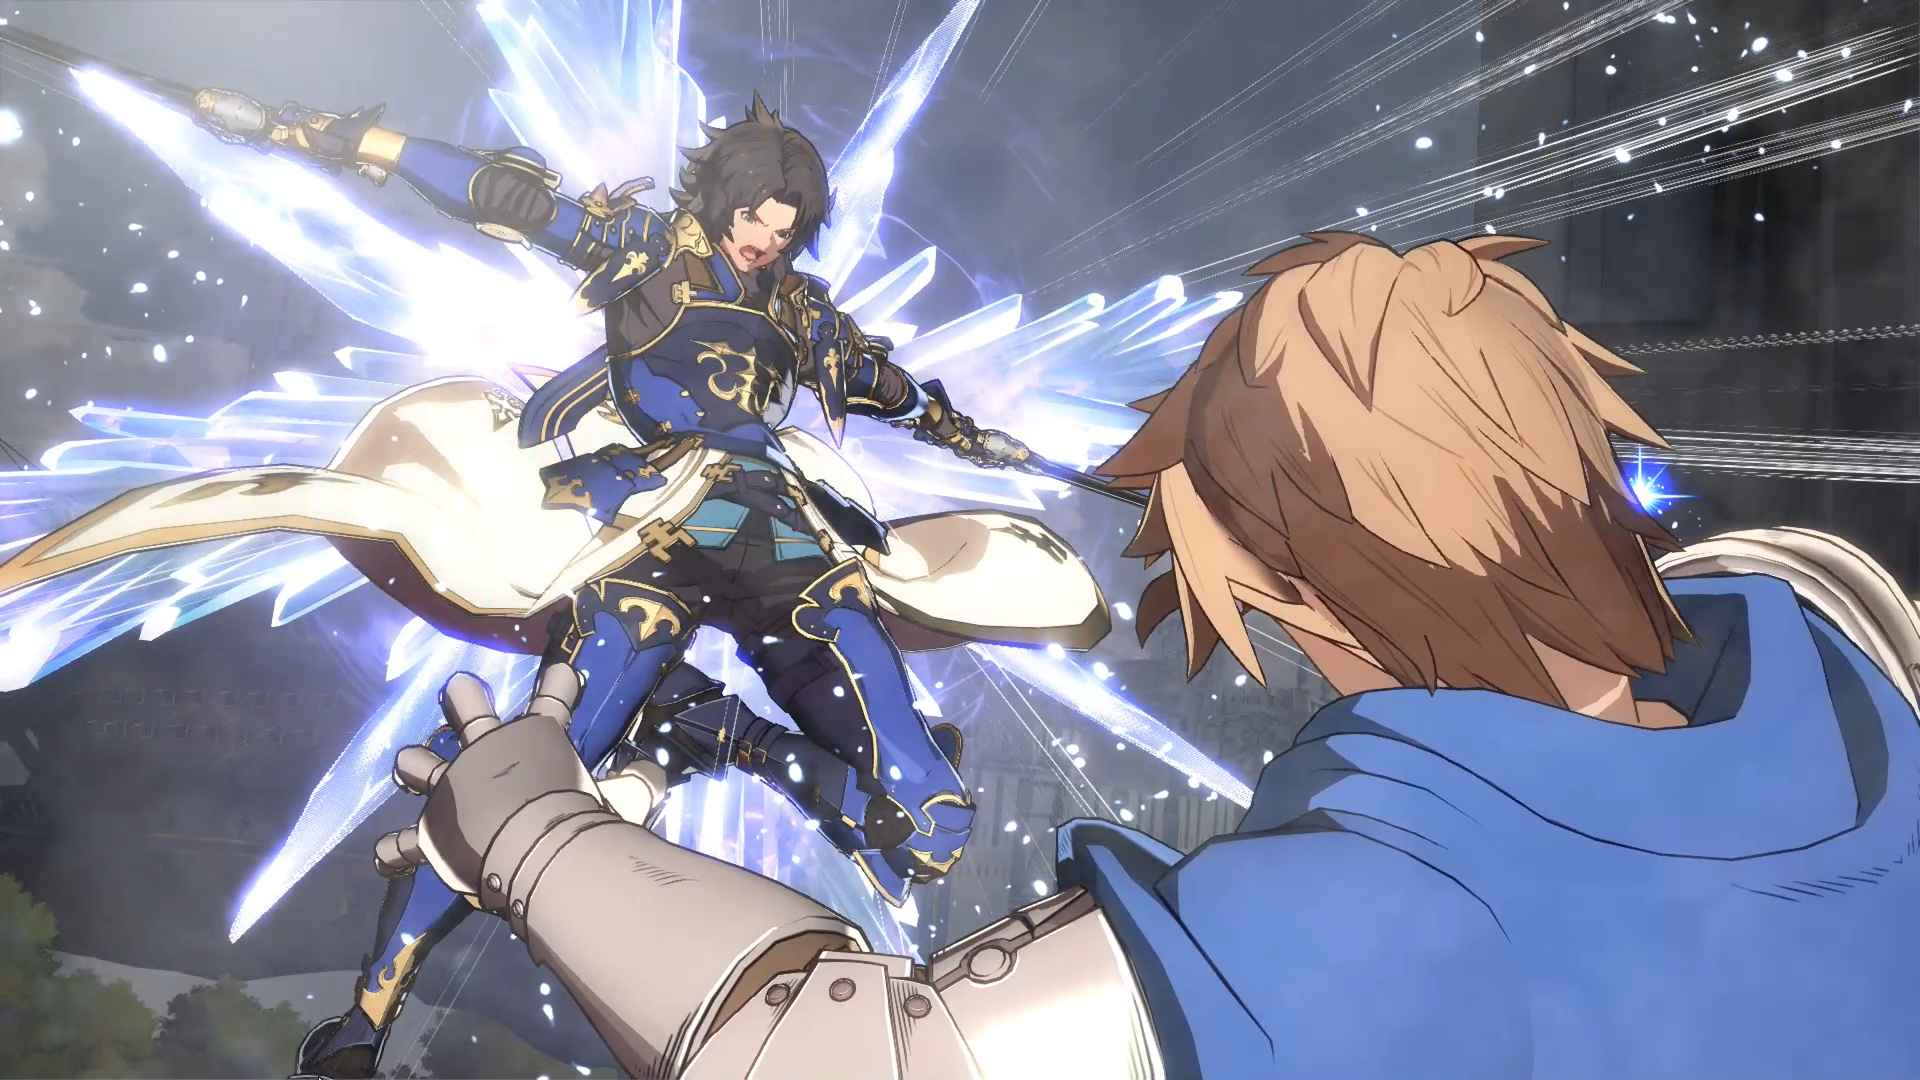 Granblue Fantasy: Versus Confirmed to Launch for PC on March 13